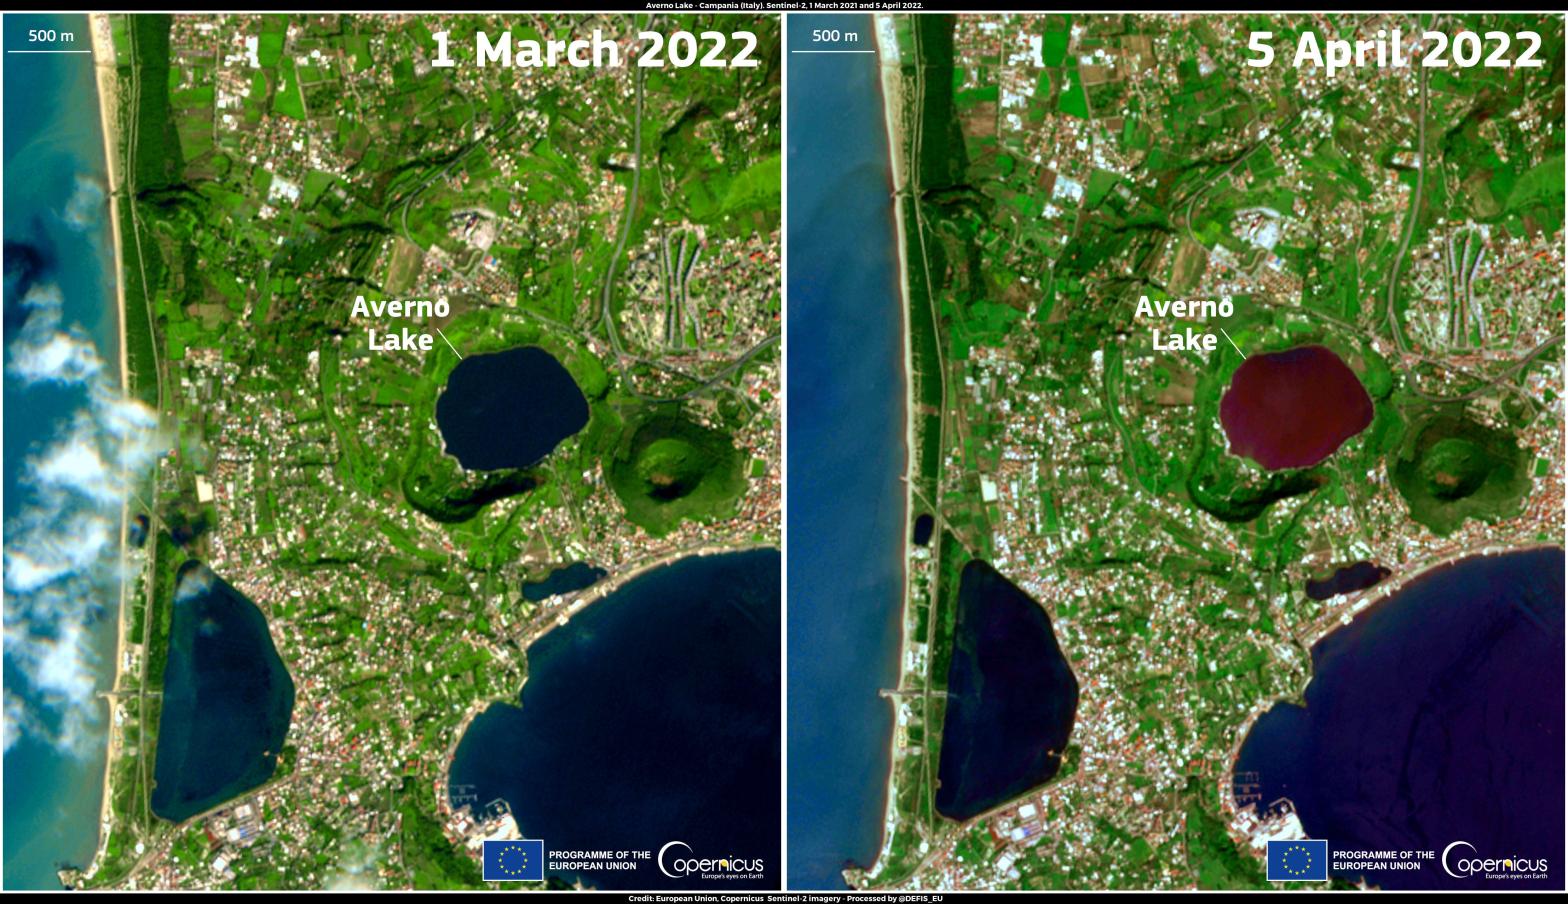 Lago d'Averno seen in satellite images one month apart.